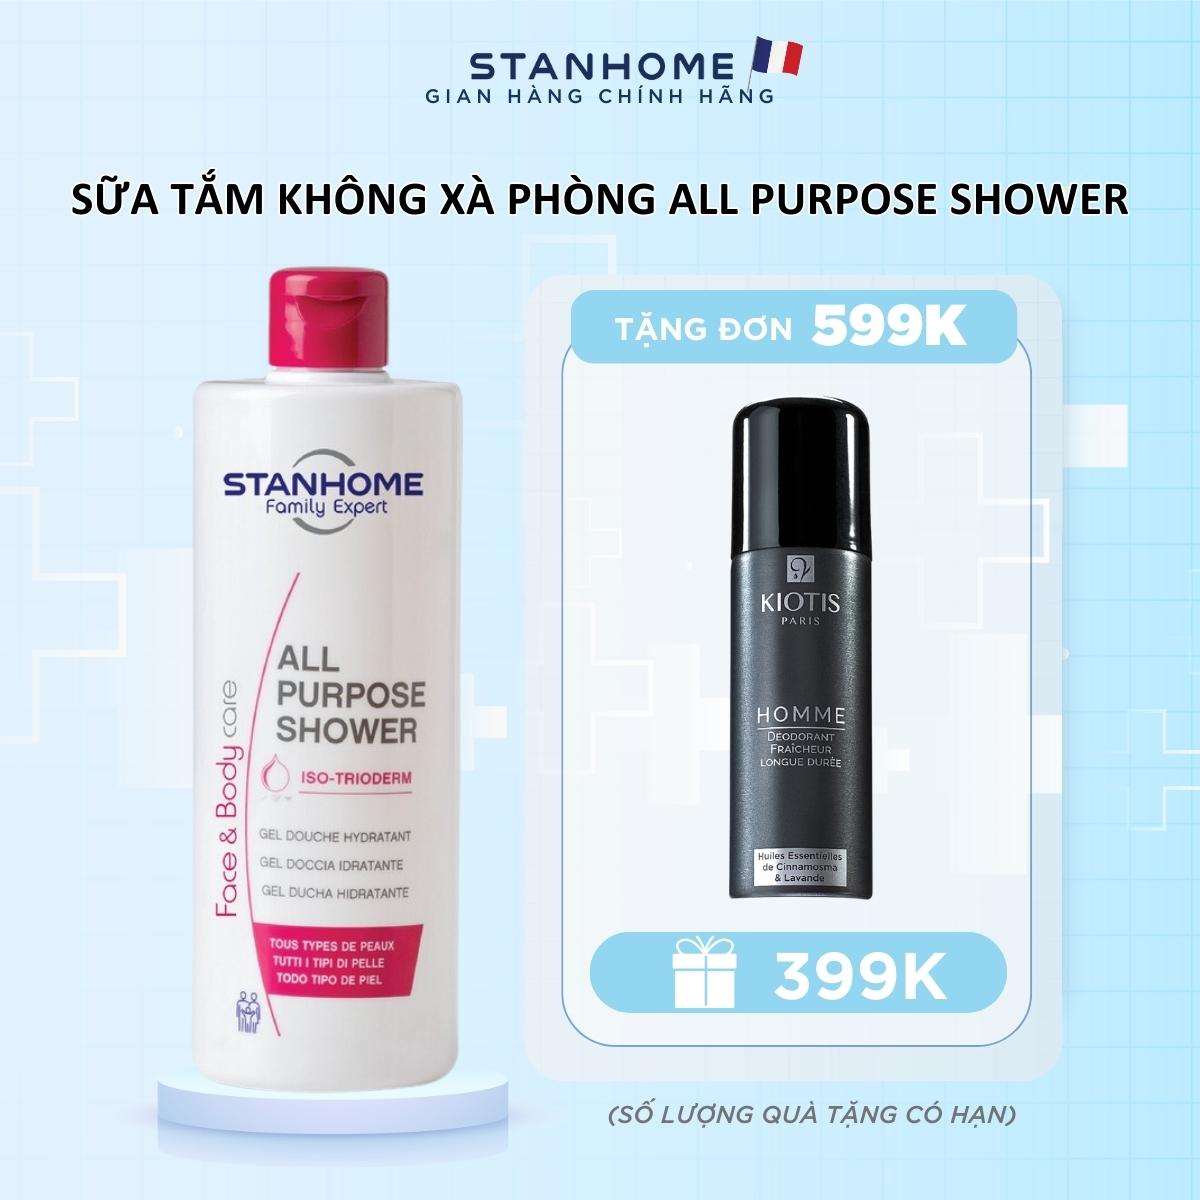 Stanhome all purpose shower gel 2 in 1 shower gel no soap suitable for all